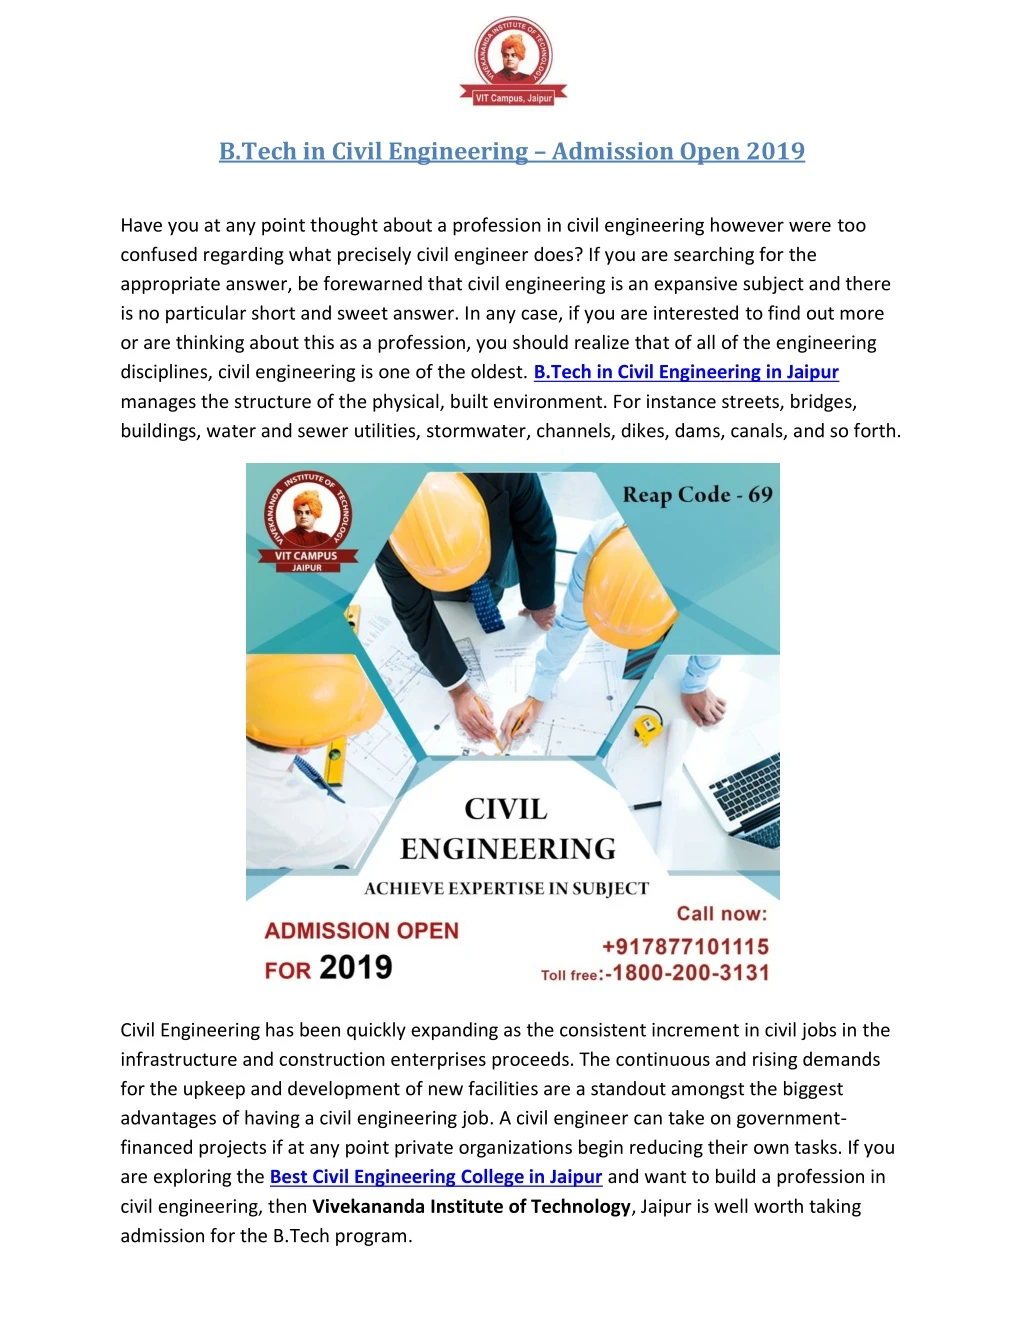 b tech in civil engineering admission open 2019